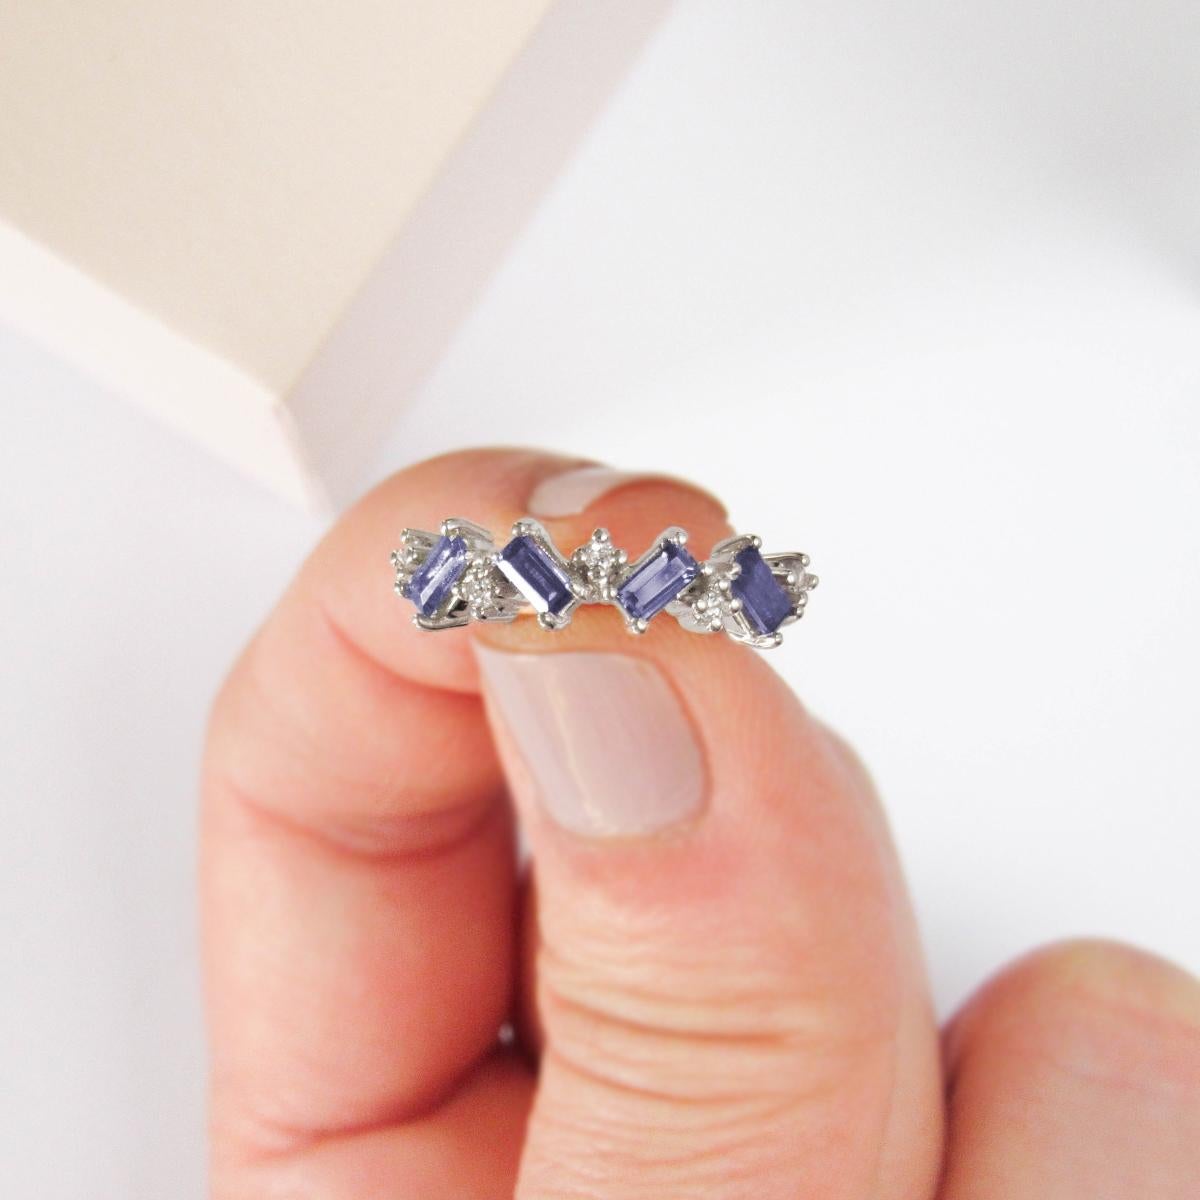 14 Karat White Gold Iolite and Diamonds Baguette Ring For Sale 1